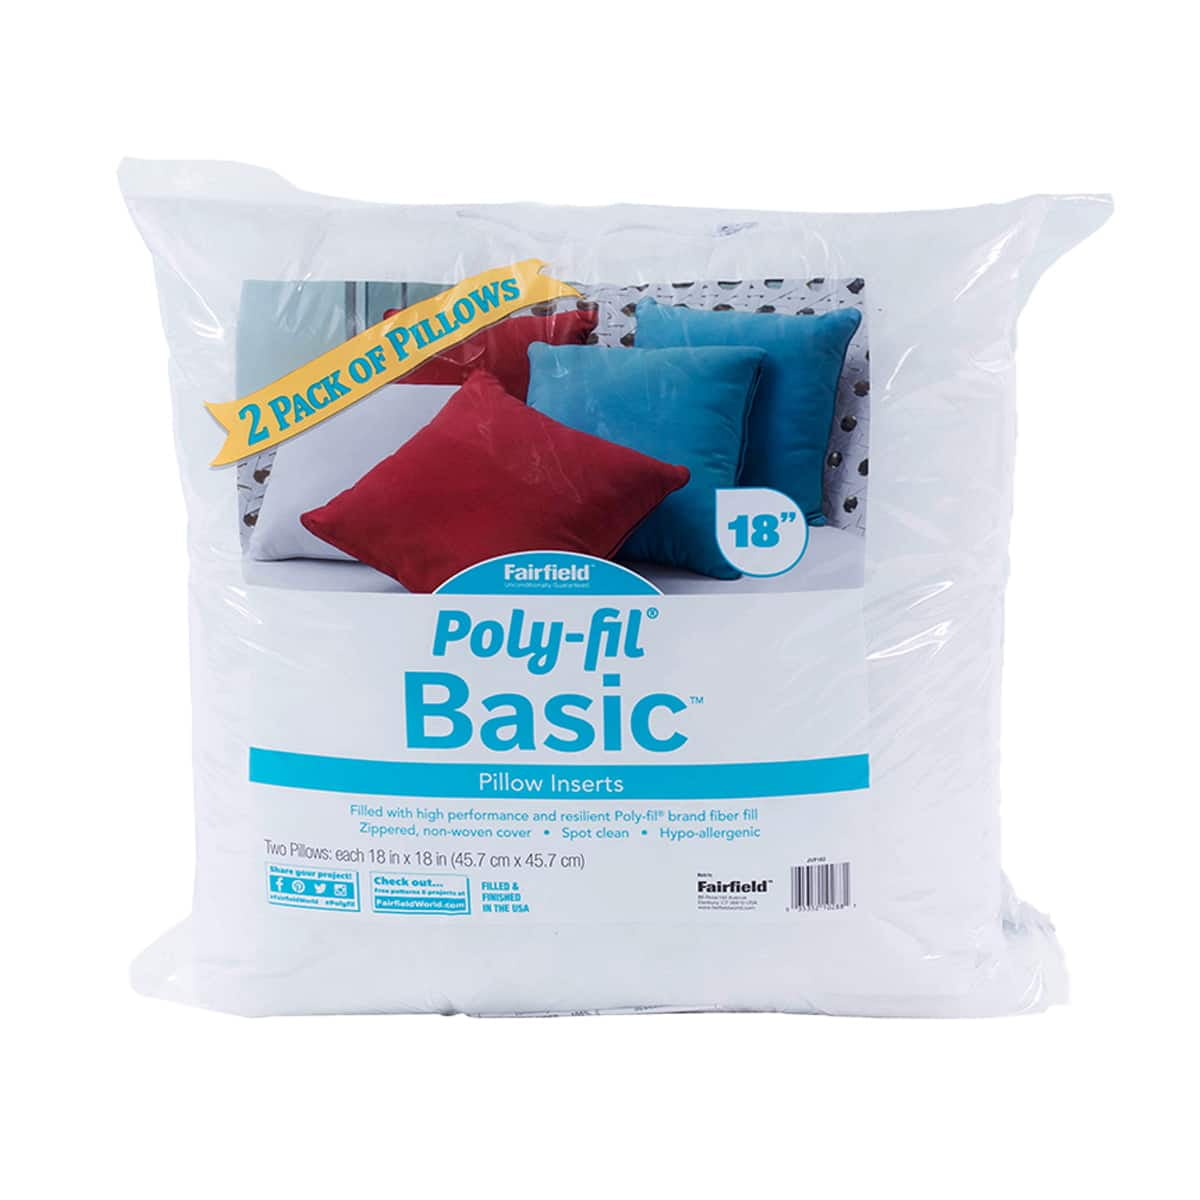  Essentials by Leisure Arts Polyester Fiber-Fil, Premium  Fiber-Fil Stuffing, 12oz Bag, High Resilience Polyfill for Filling Stuffed  Animals, Crafts, Pillow Stuffing, Cushion Stuffing : Arts, Crafts & Sewing